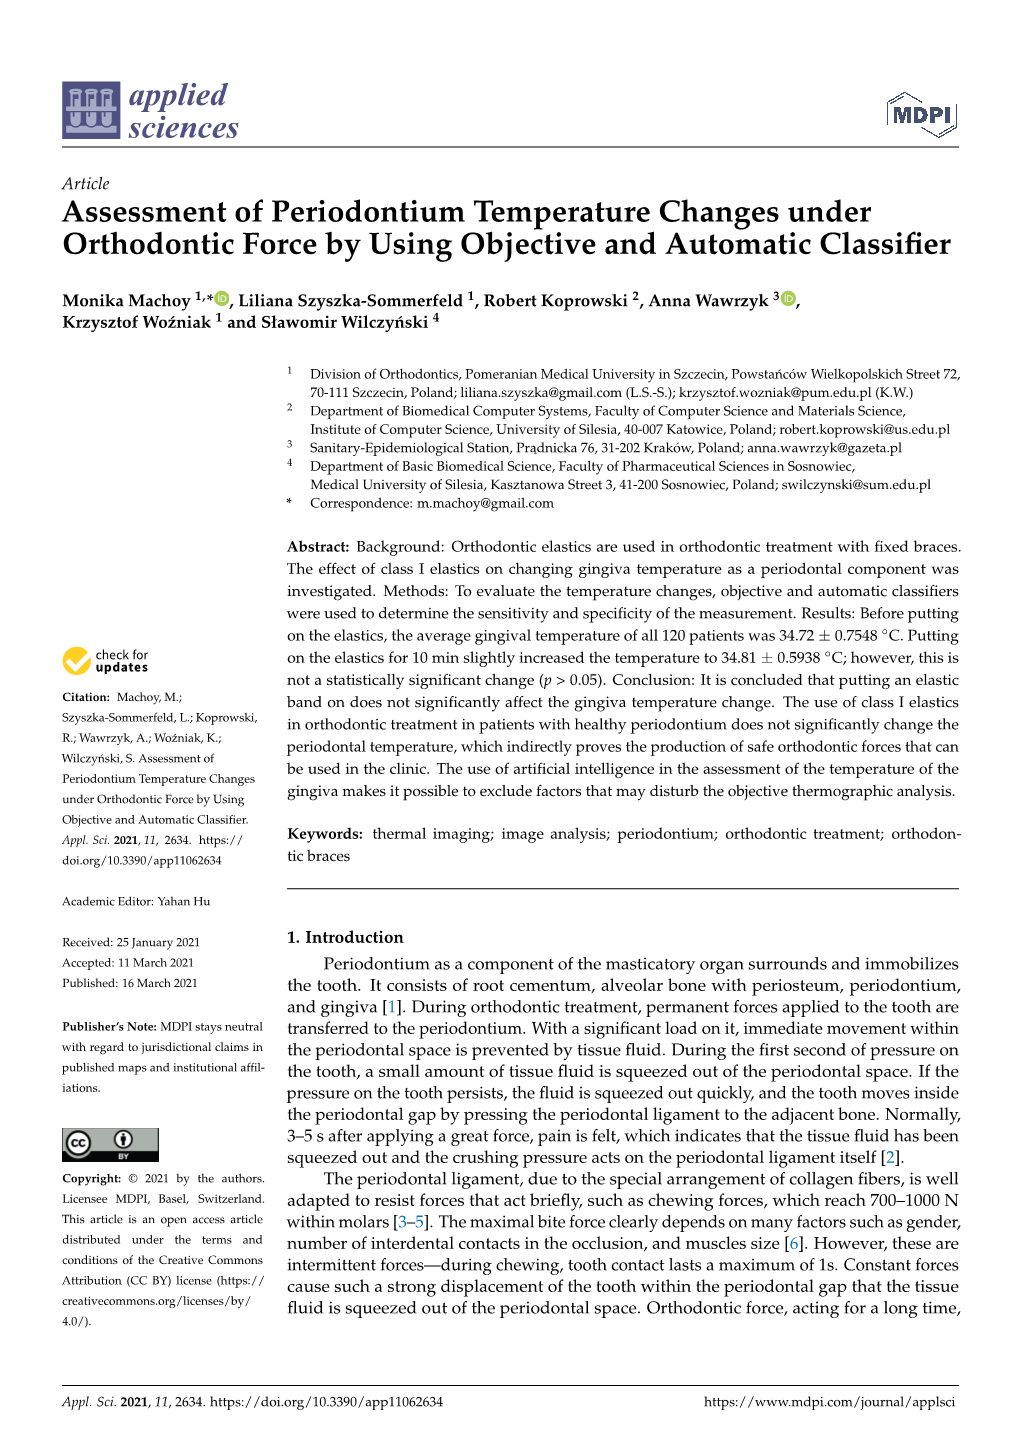 Assessment of Periodontium Temperature Changes Under Orthodontic Force by Using Objective and Automatic Classiﬁer